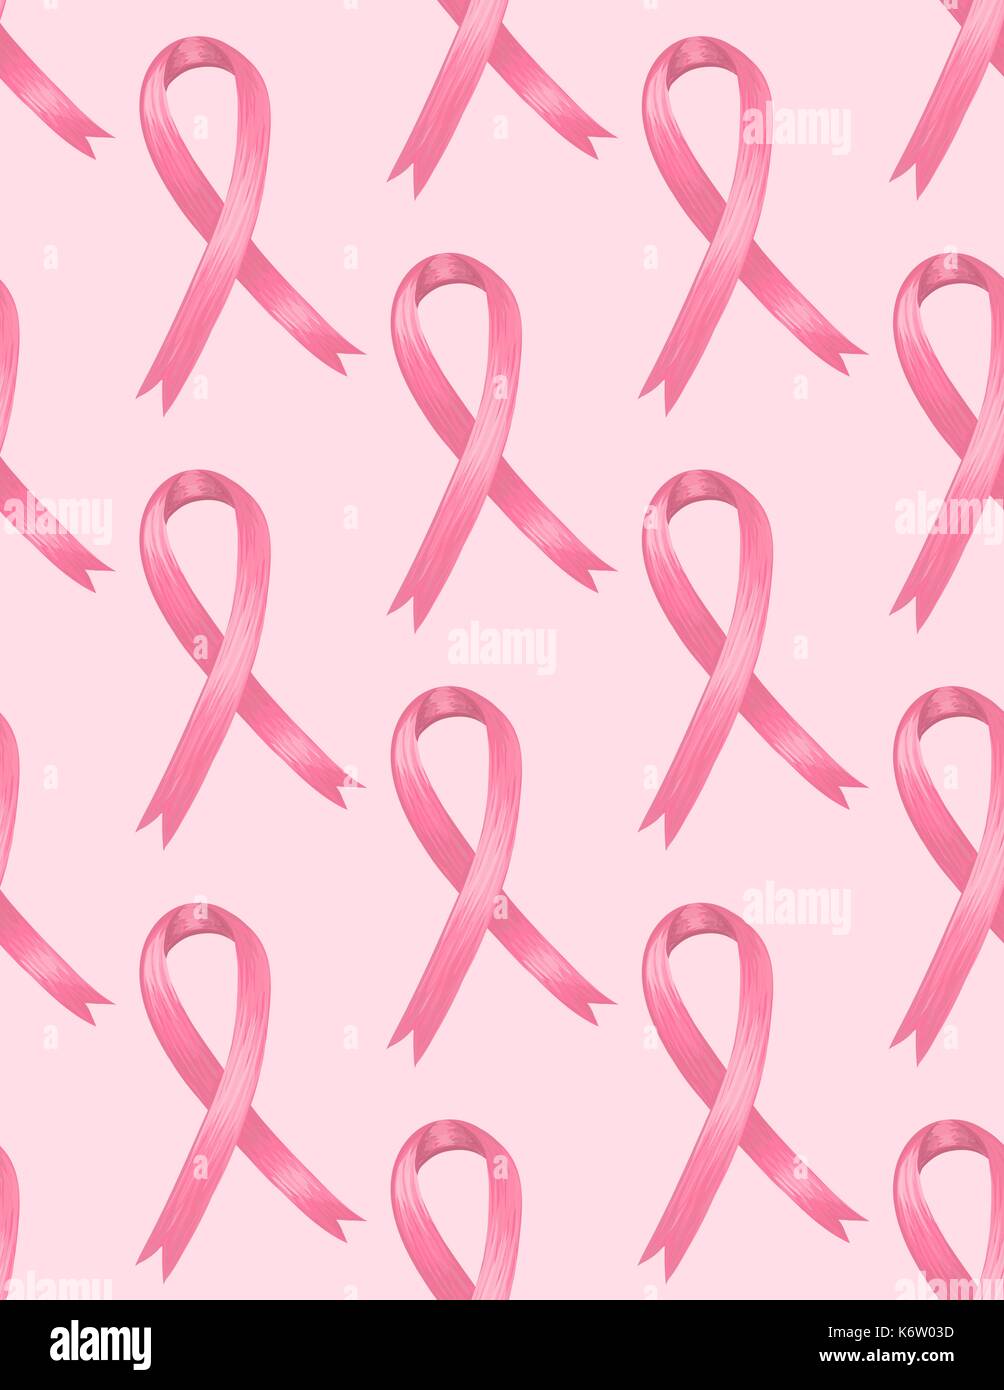 Breast cancer awareness pink ribbons seamless pattern EPS10 file